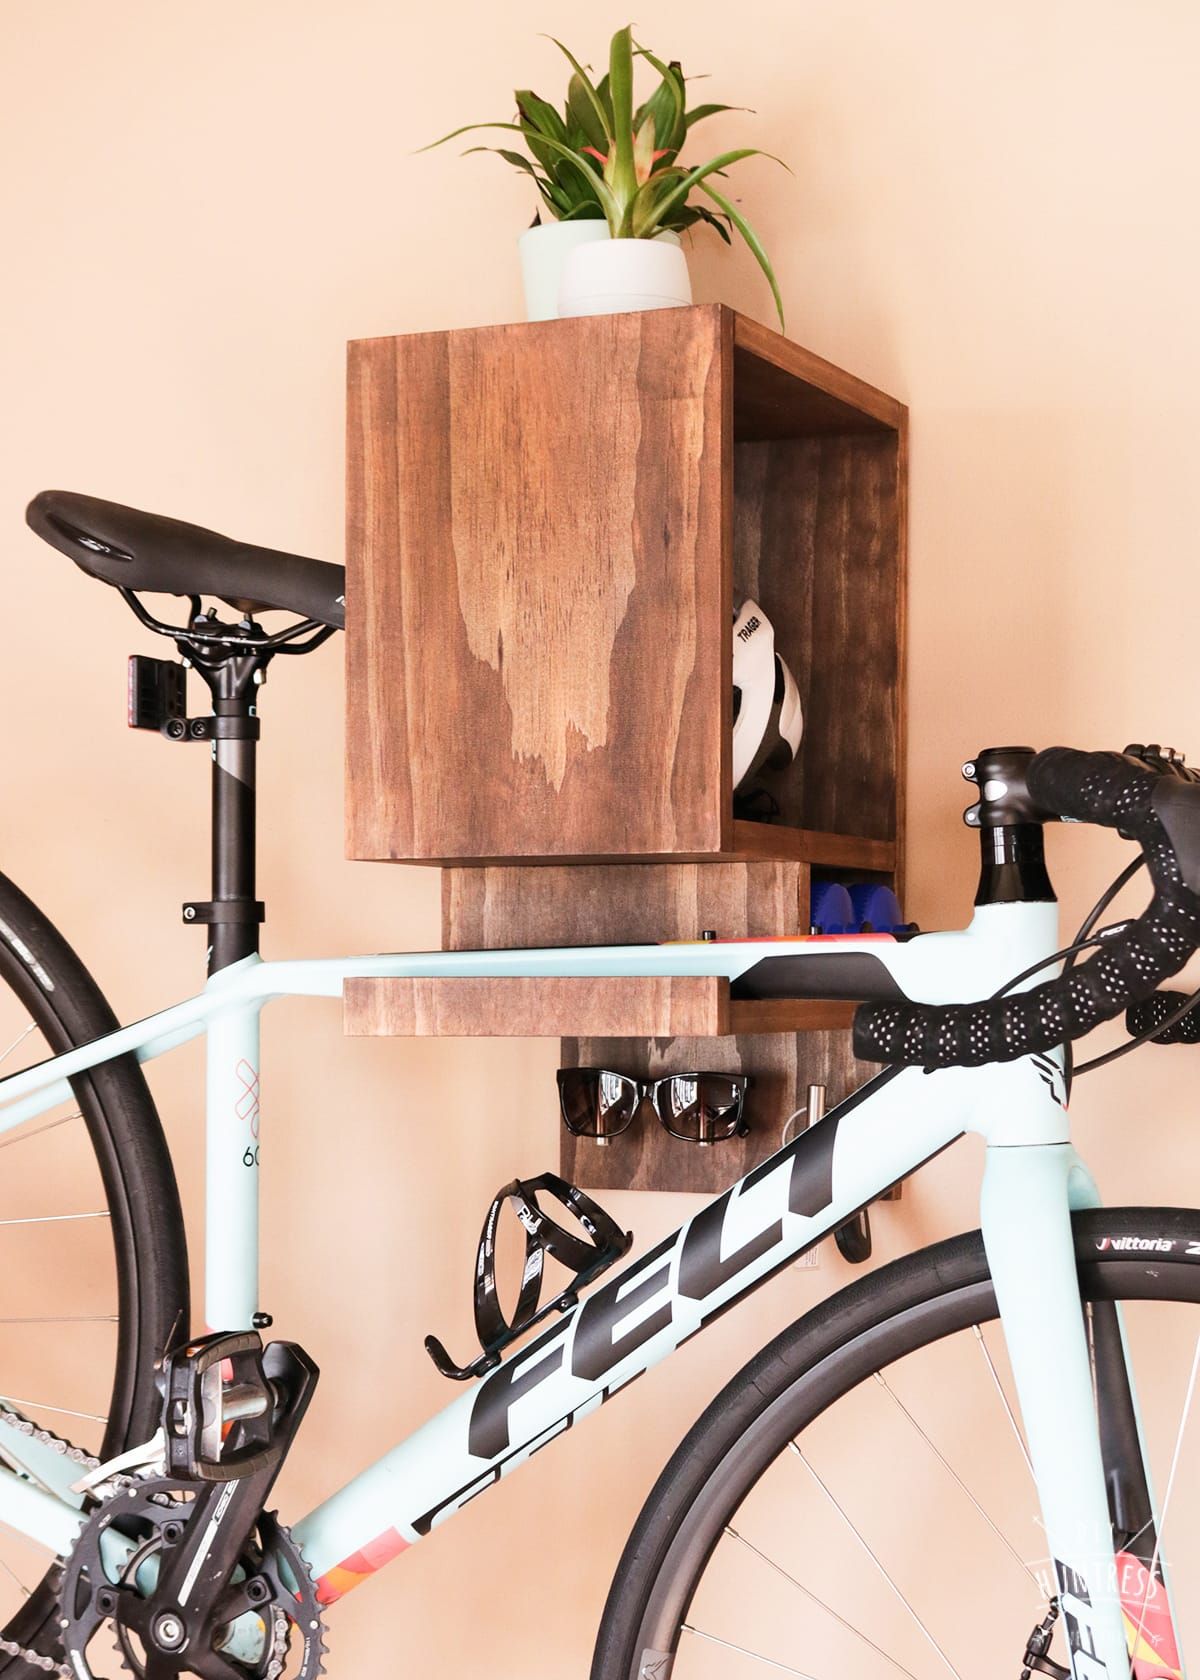 How to Mount Your Bike on the Wall